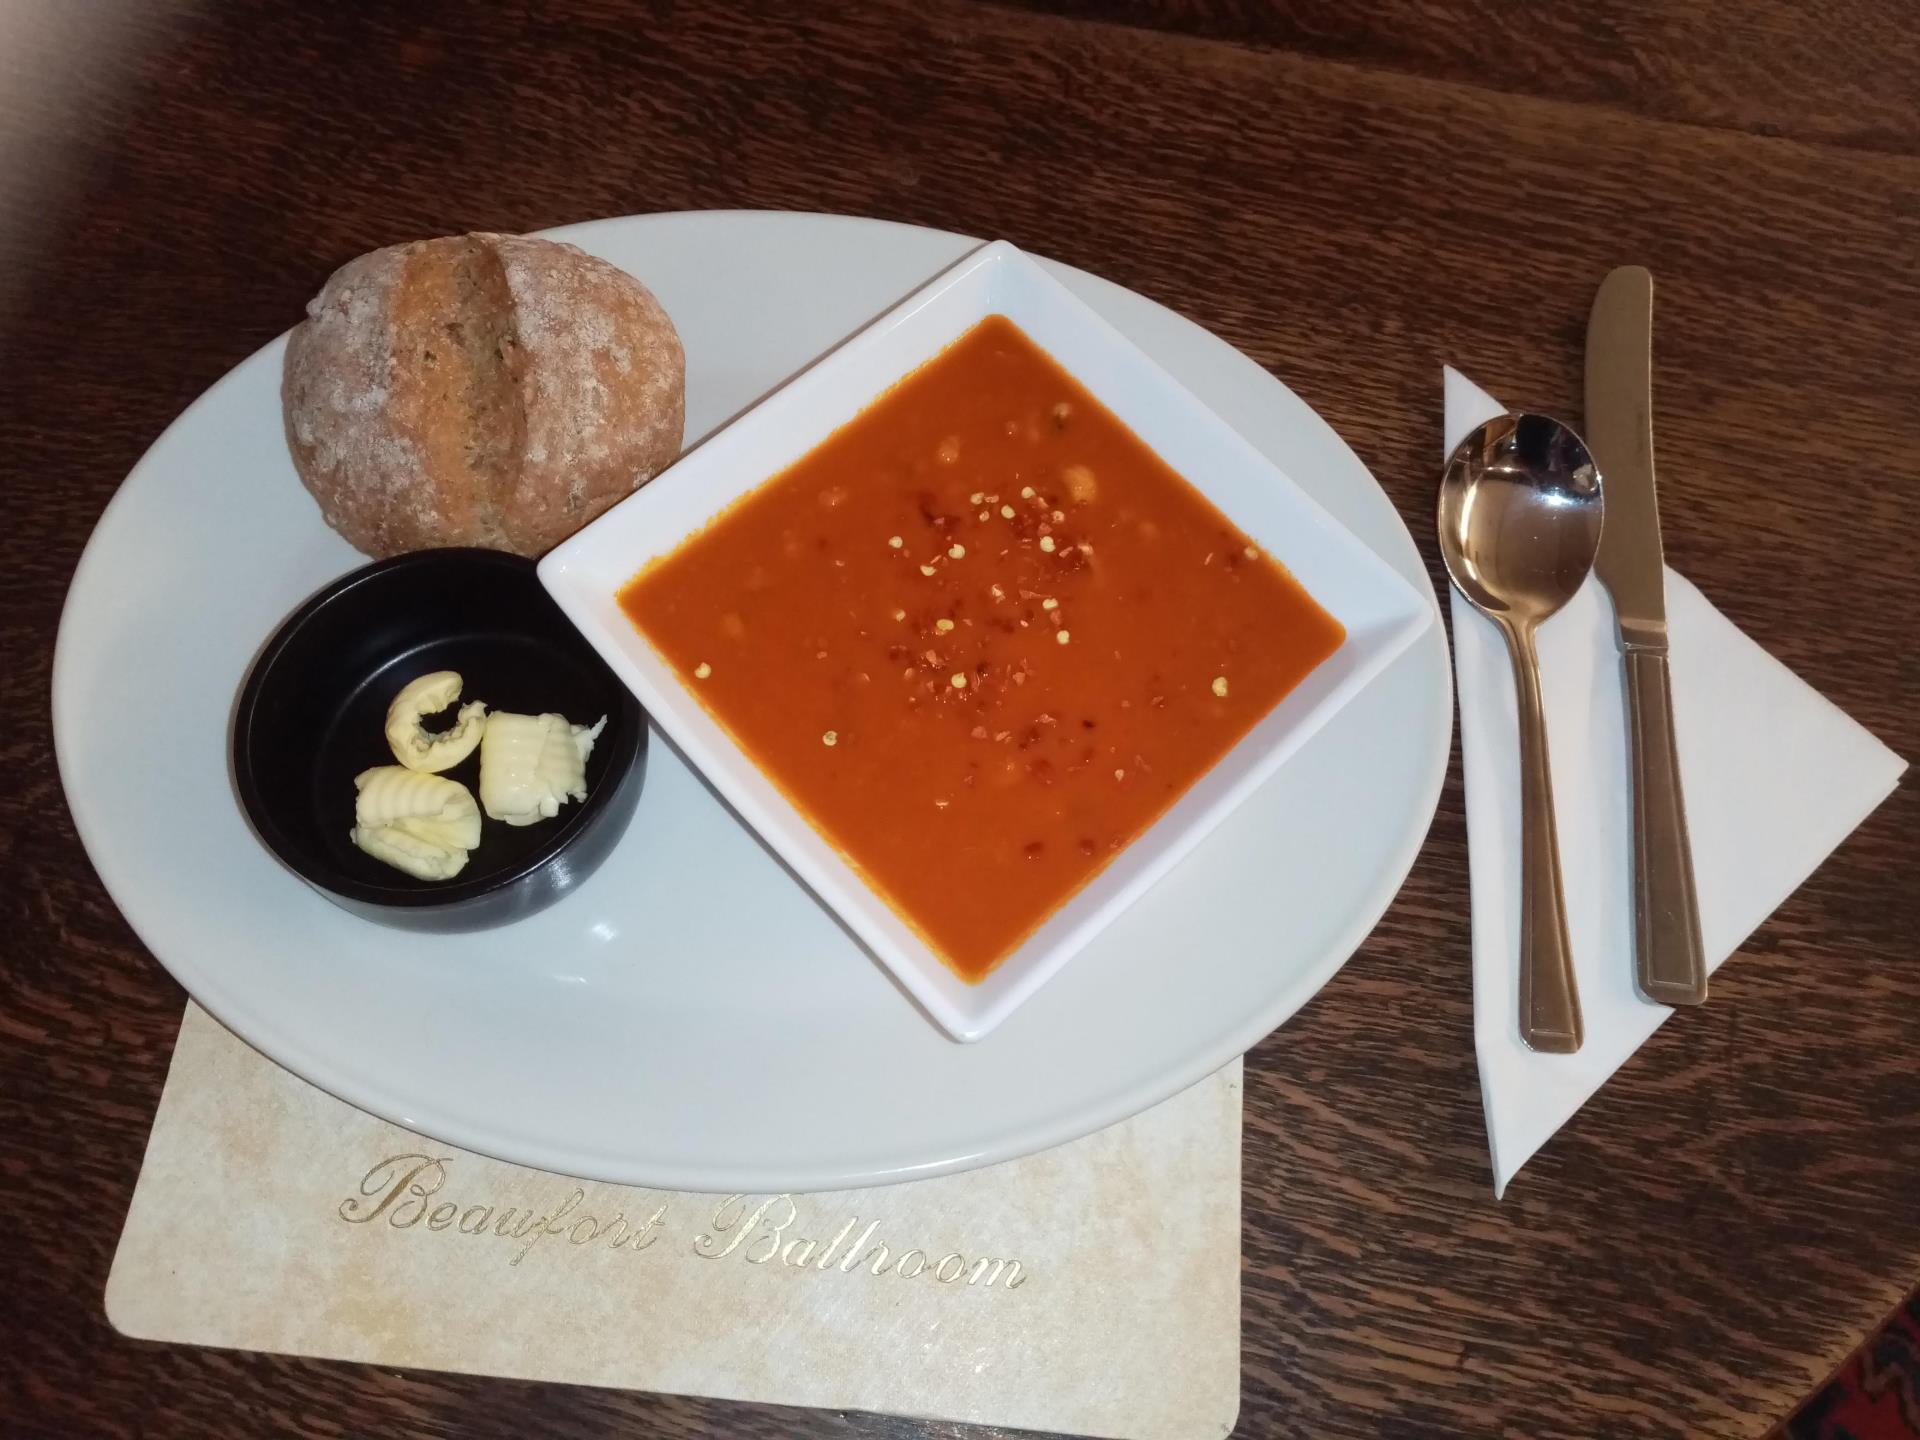 Home made soup with our own bread